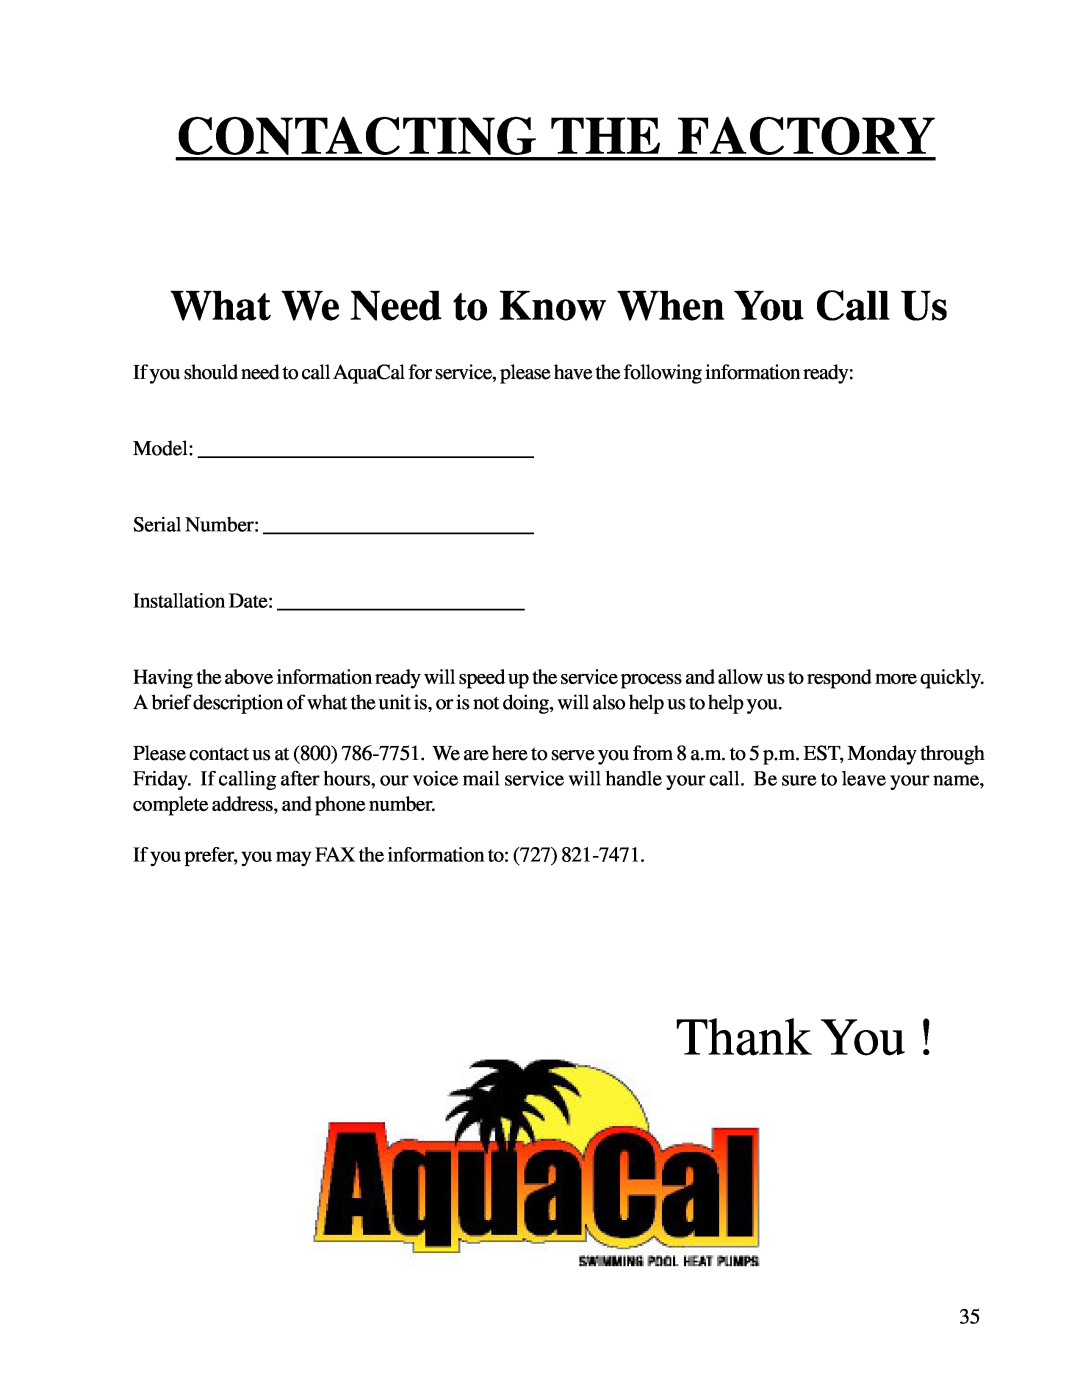 Aquacal T135, T65, T115 owner manual Contacting The Factory, What We Need to Know When You Call Us, Thank You 